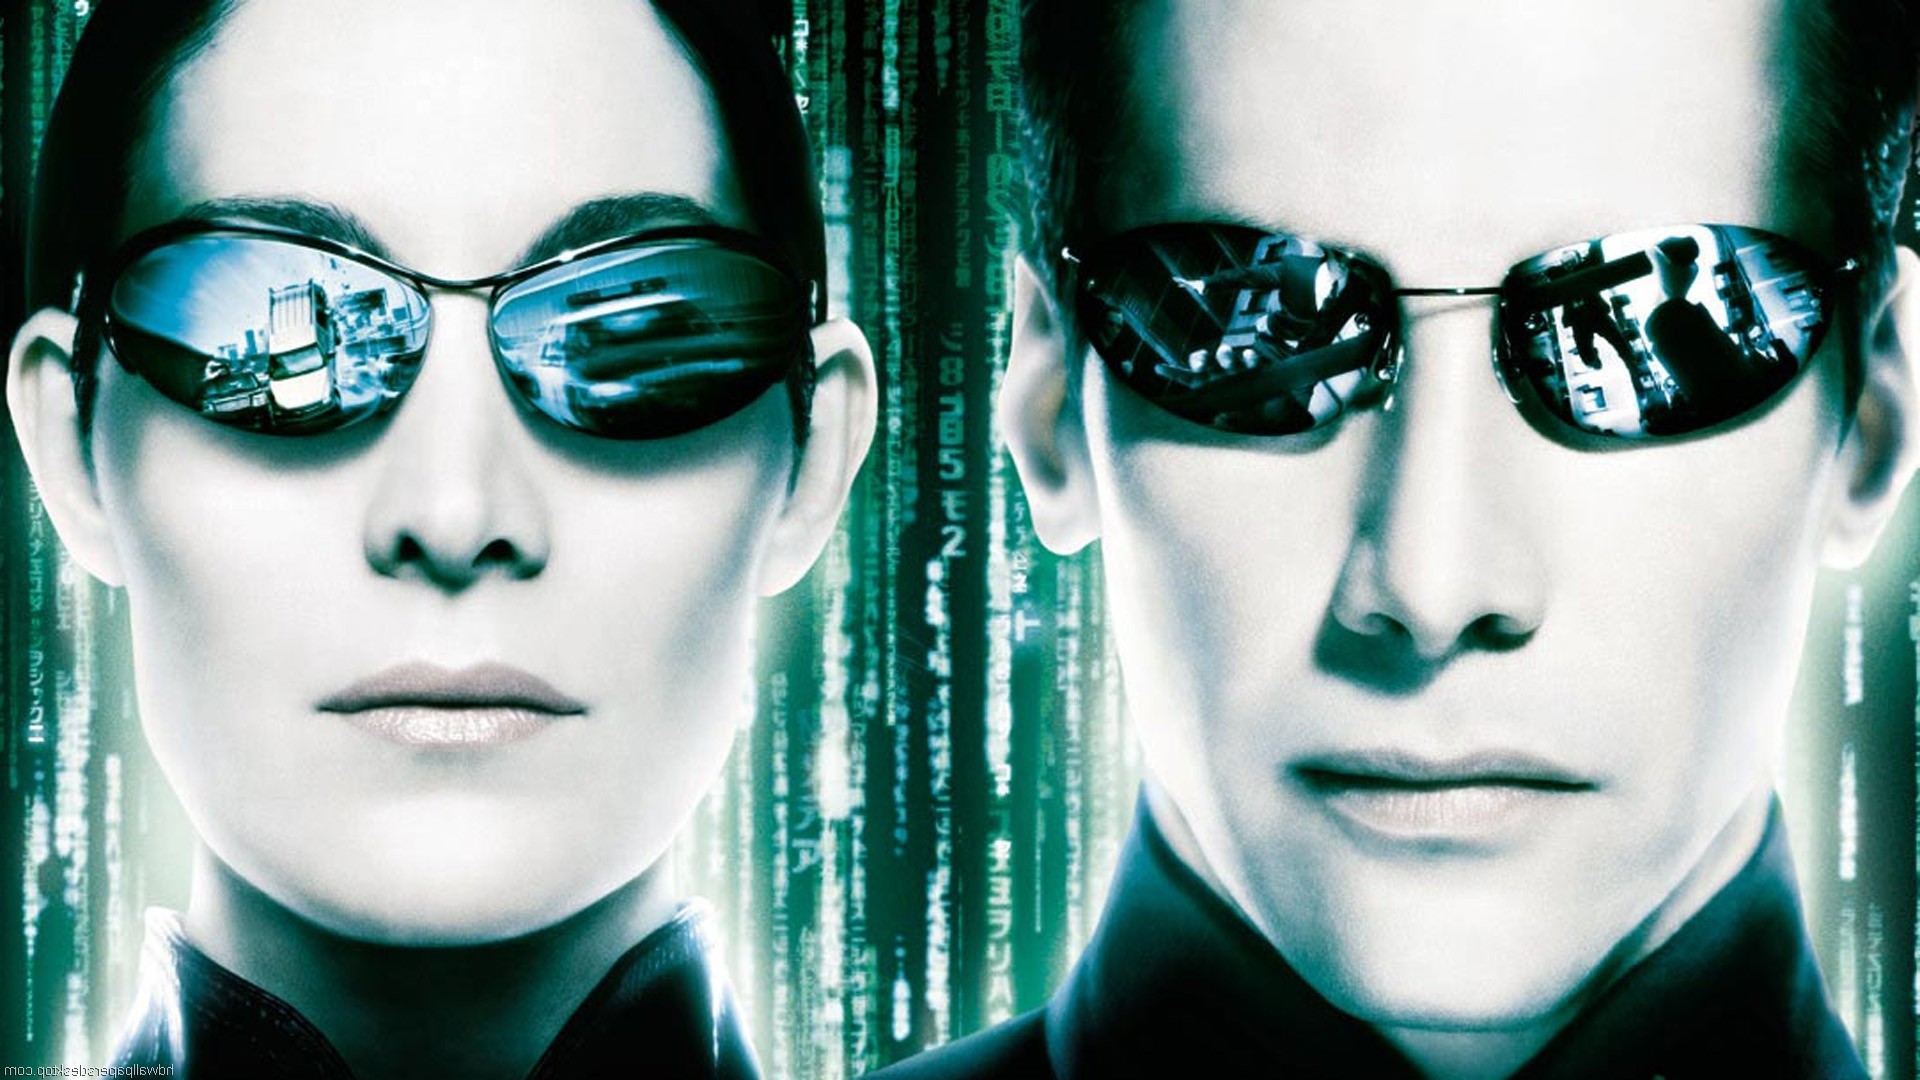 The Matrix Movies The Matrix Reloaded Neo Keanu Reeves Carrie Anne Moss Trinity Wallpapers